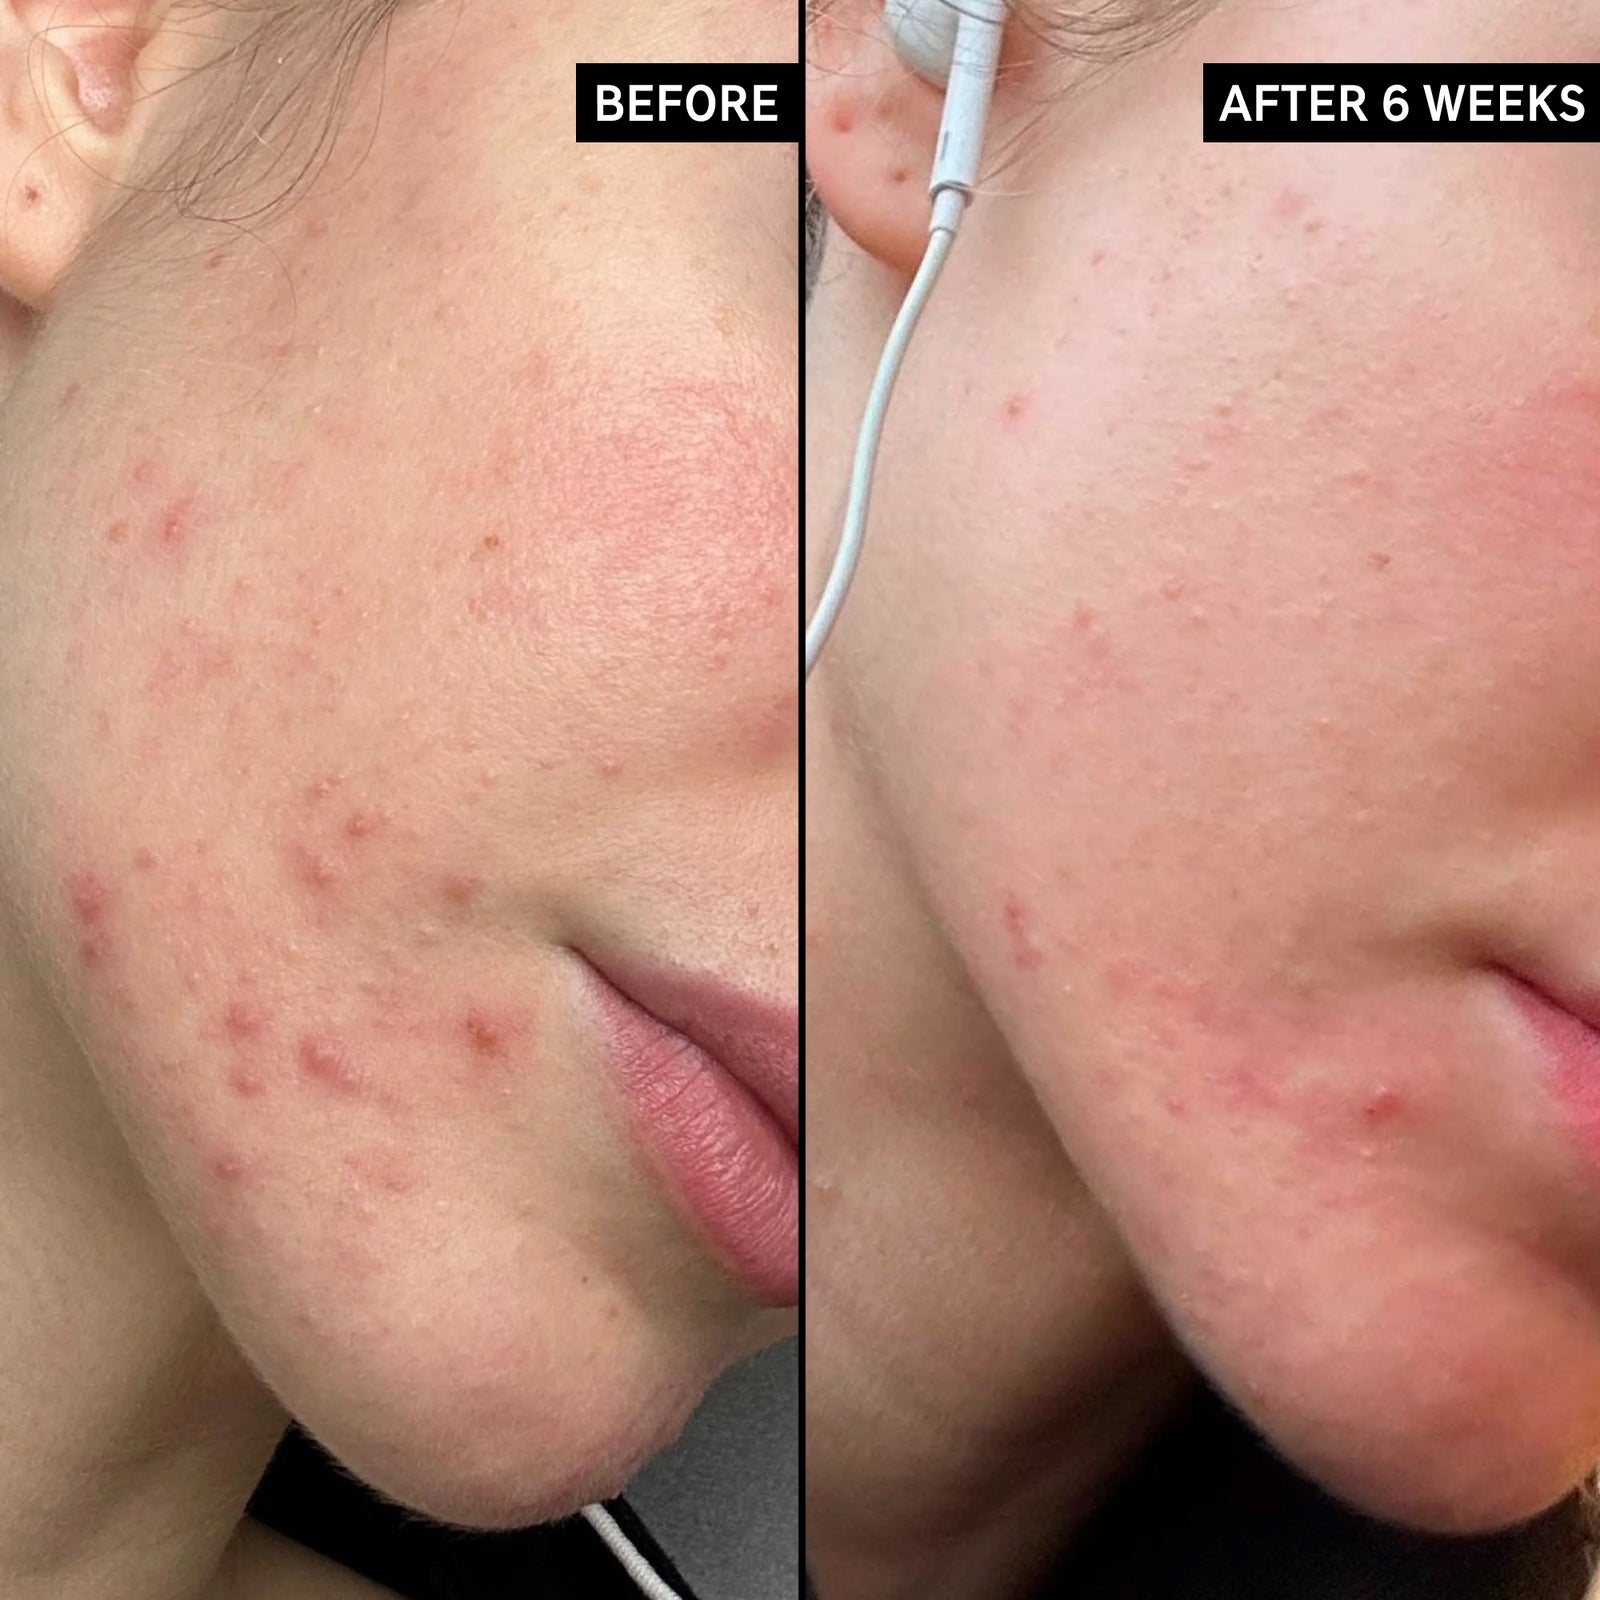 Before and after pictures of someone using Acne Clearing Moisturizer after 6 weeks